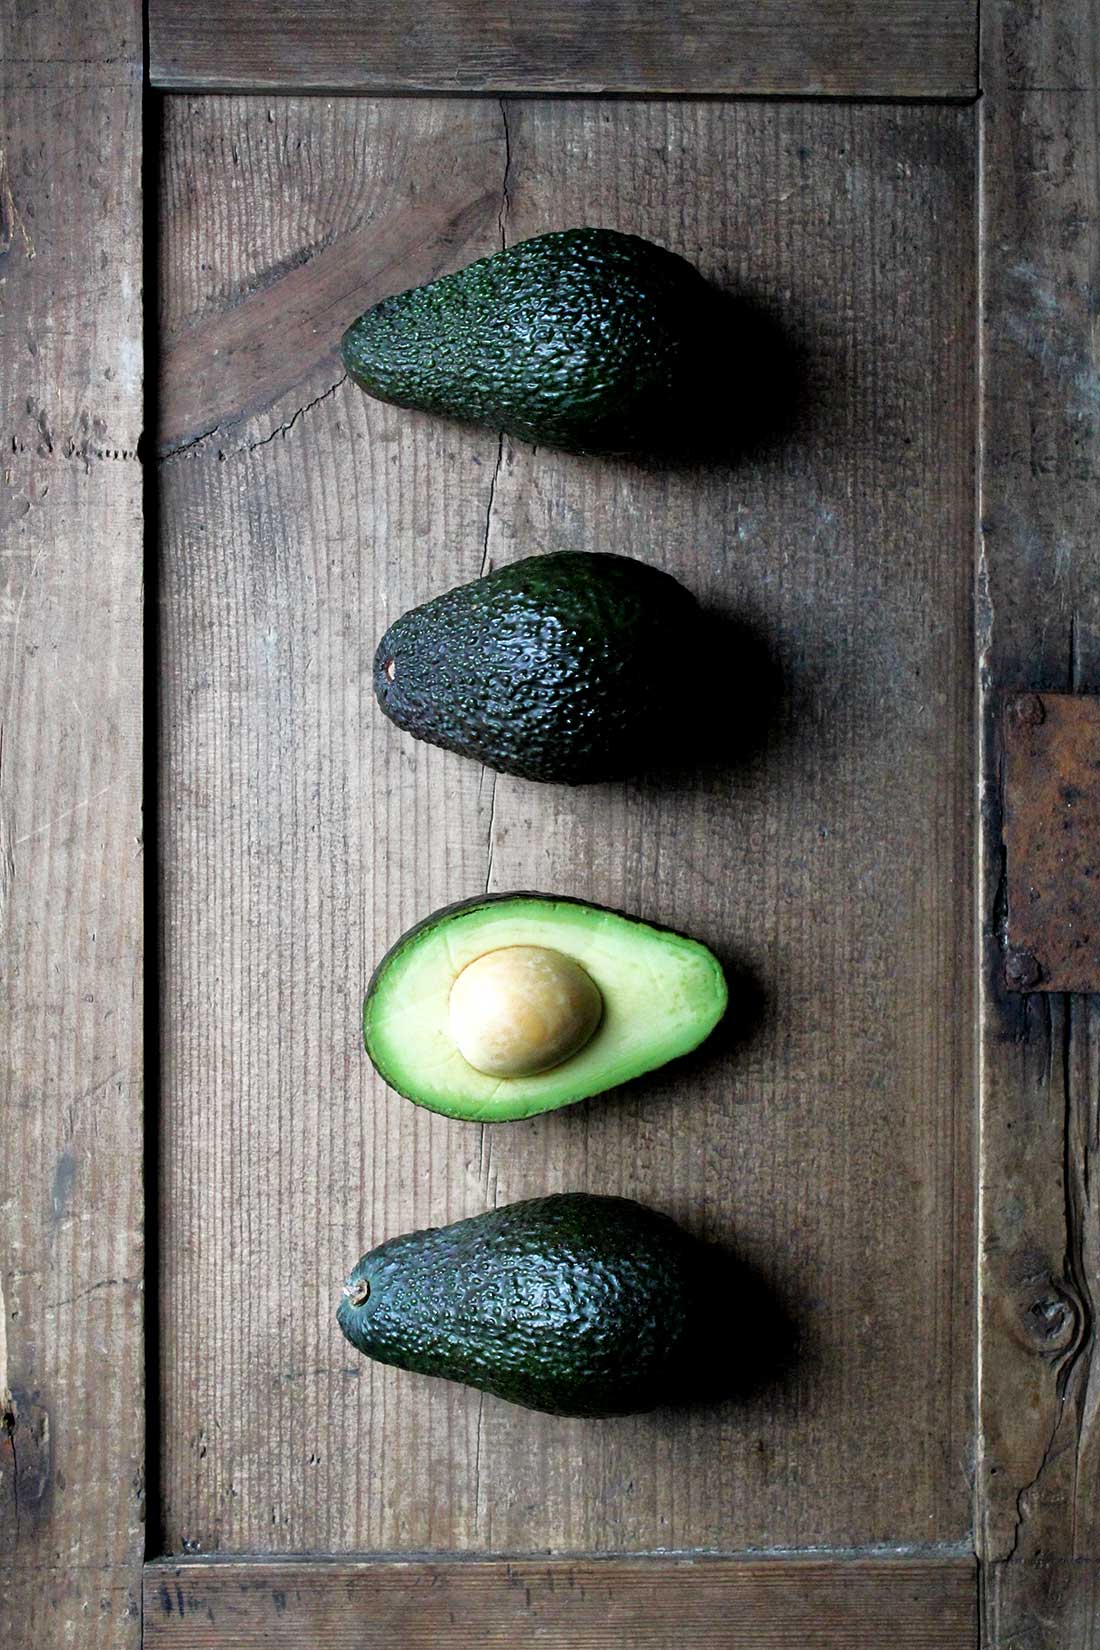 how to perfectly cut an avocado